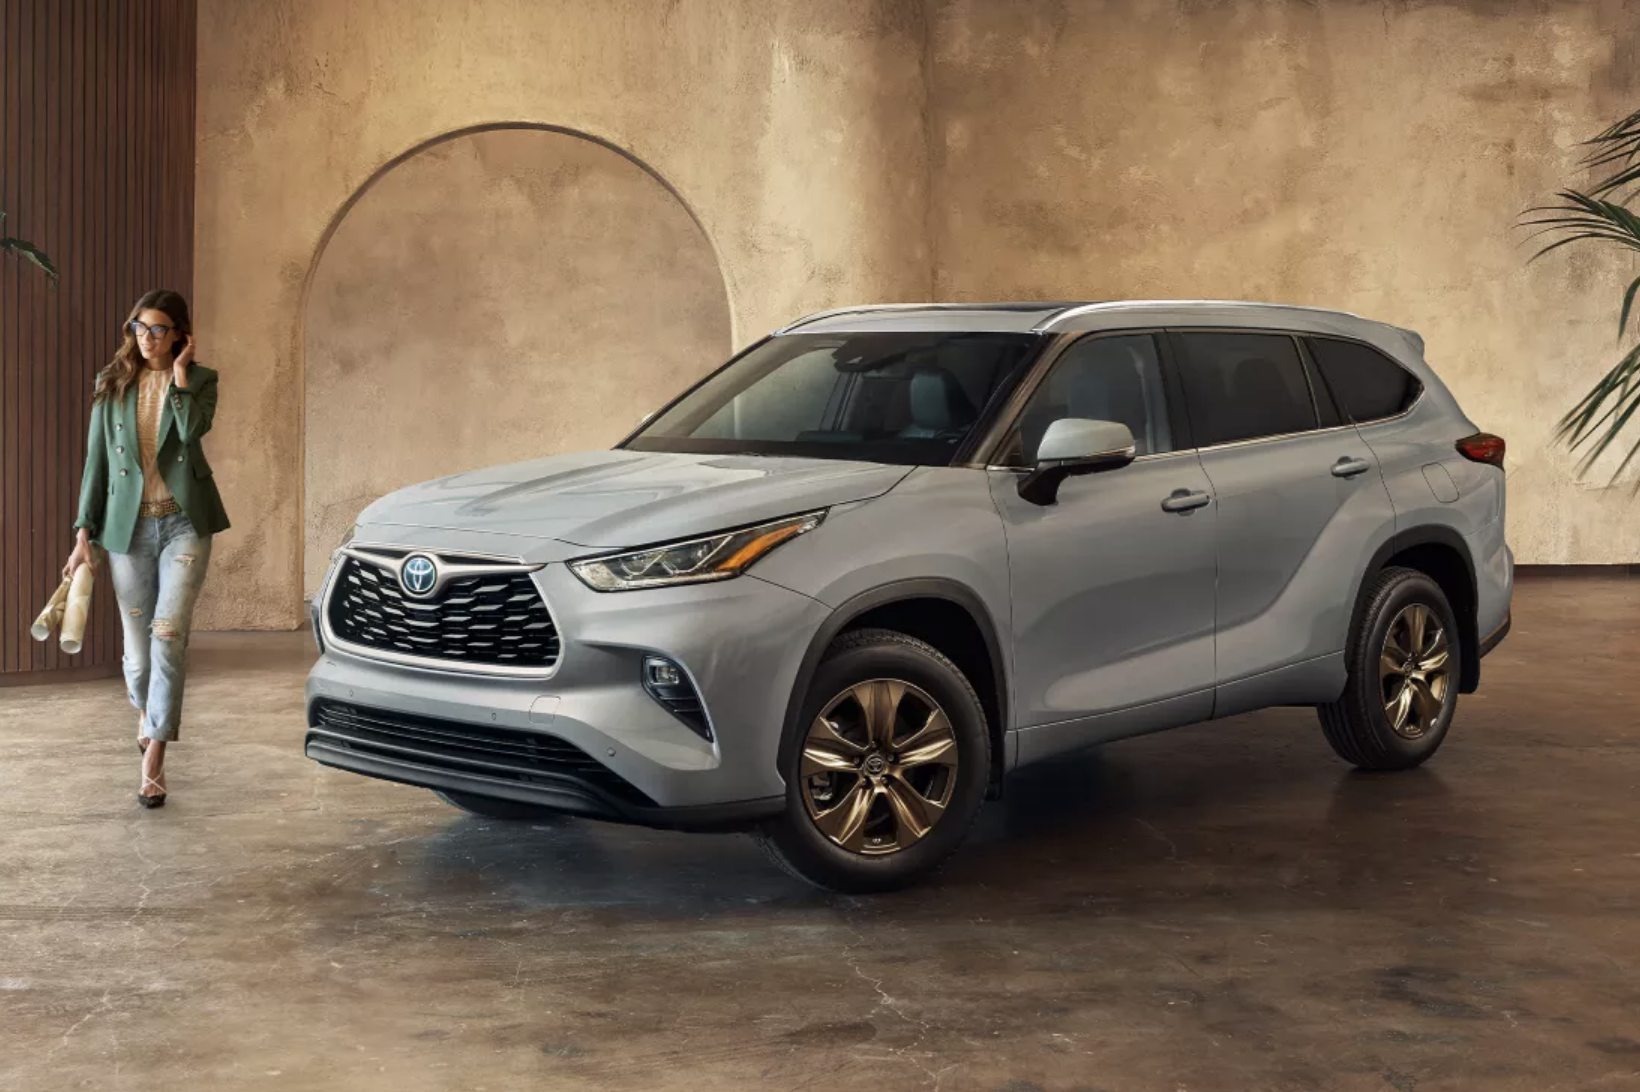 2022 Toyota Highlander for Lease or Sale | Toyota of Smithfield